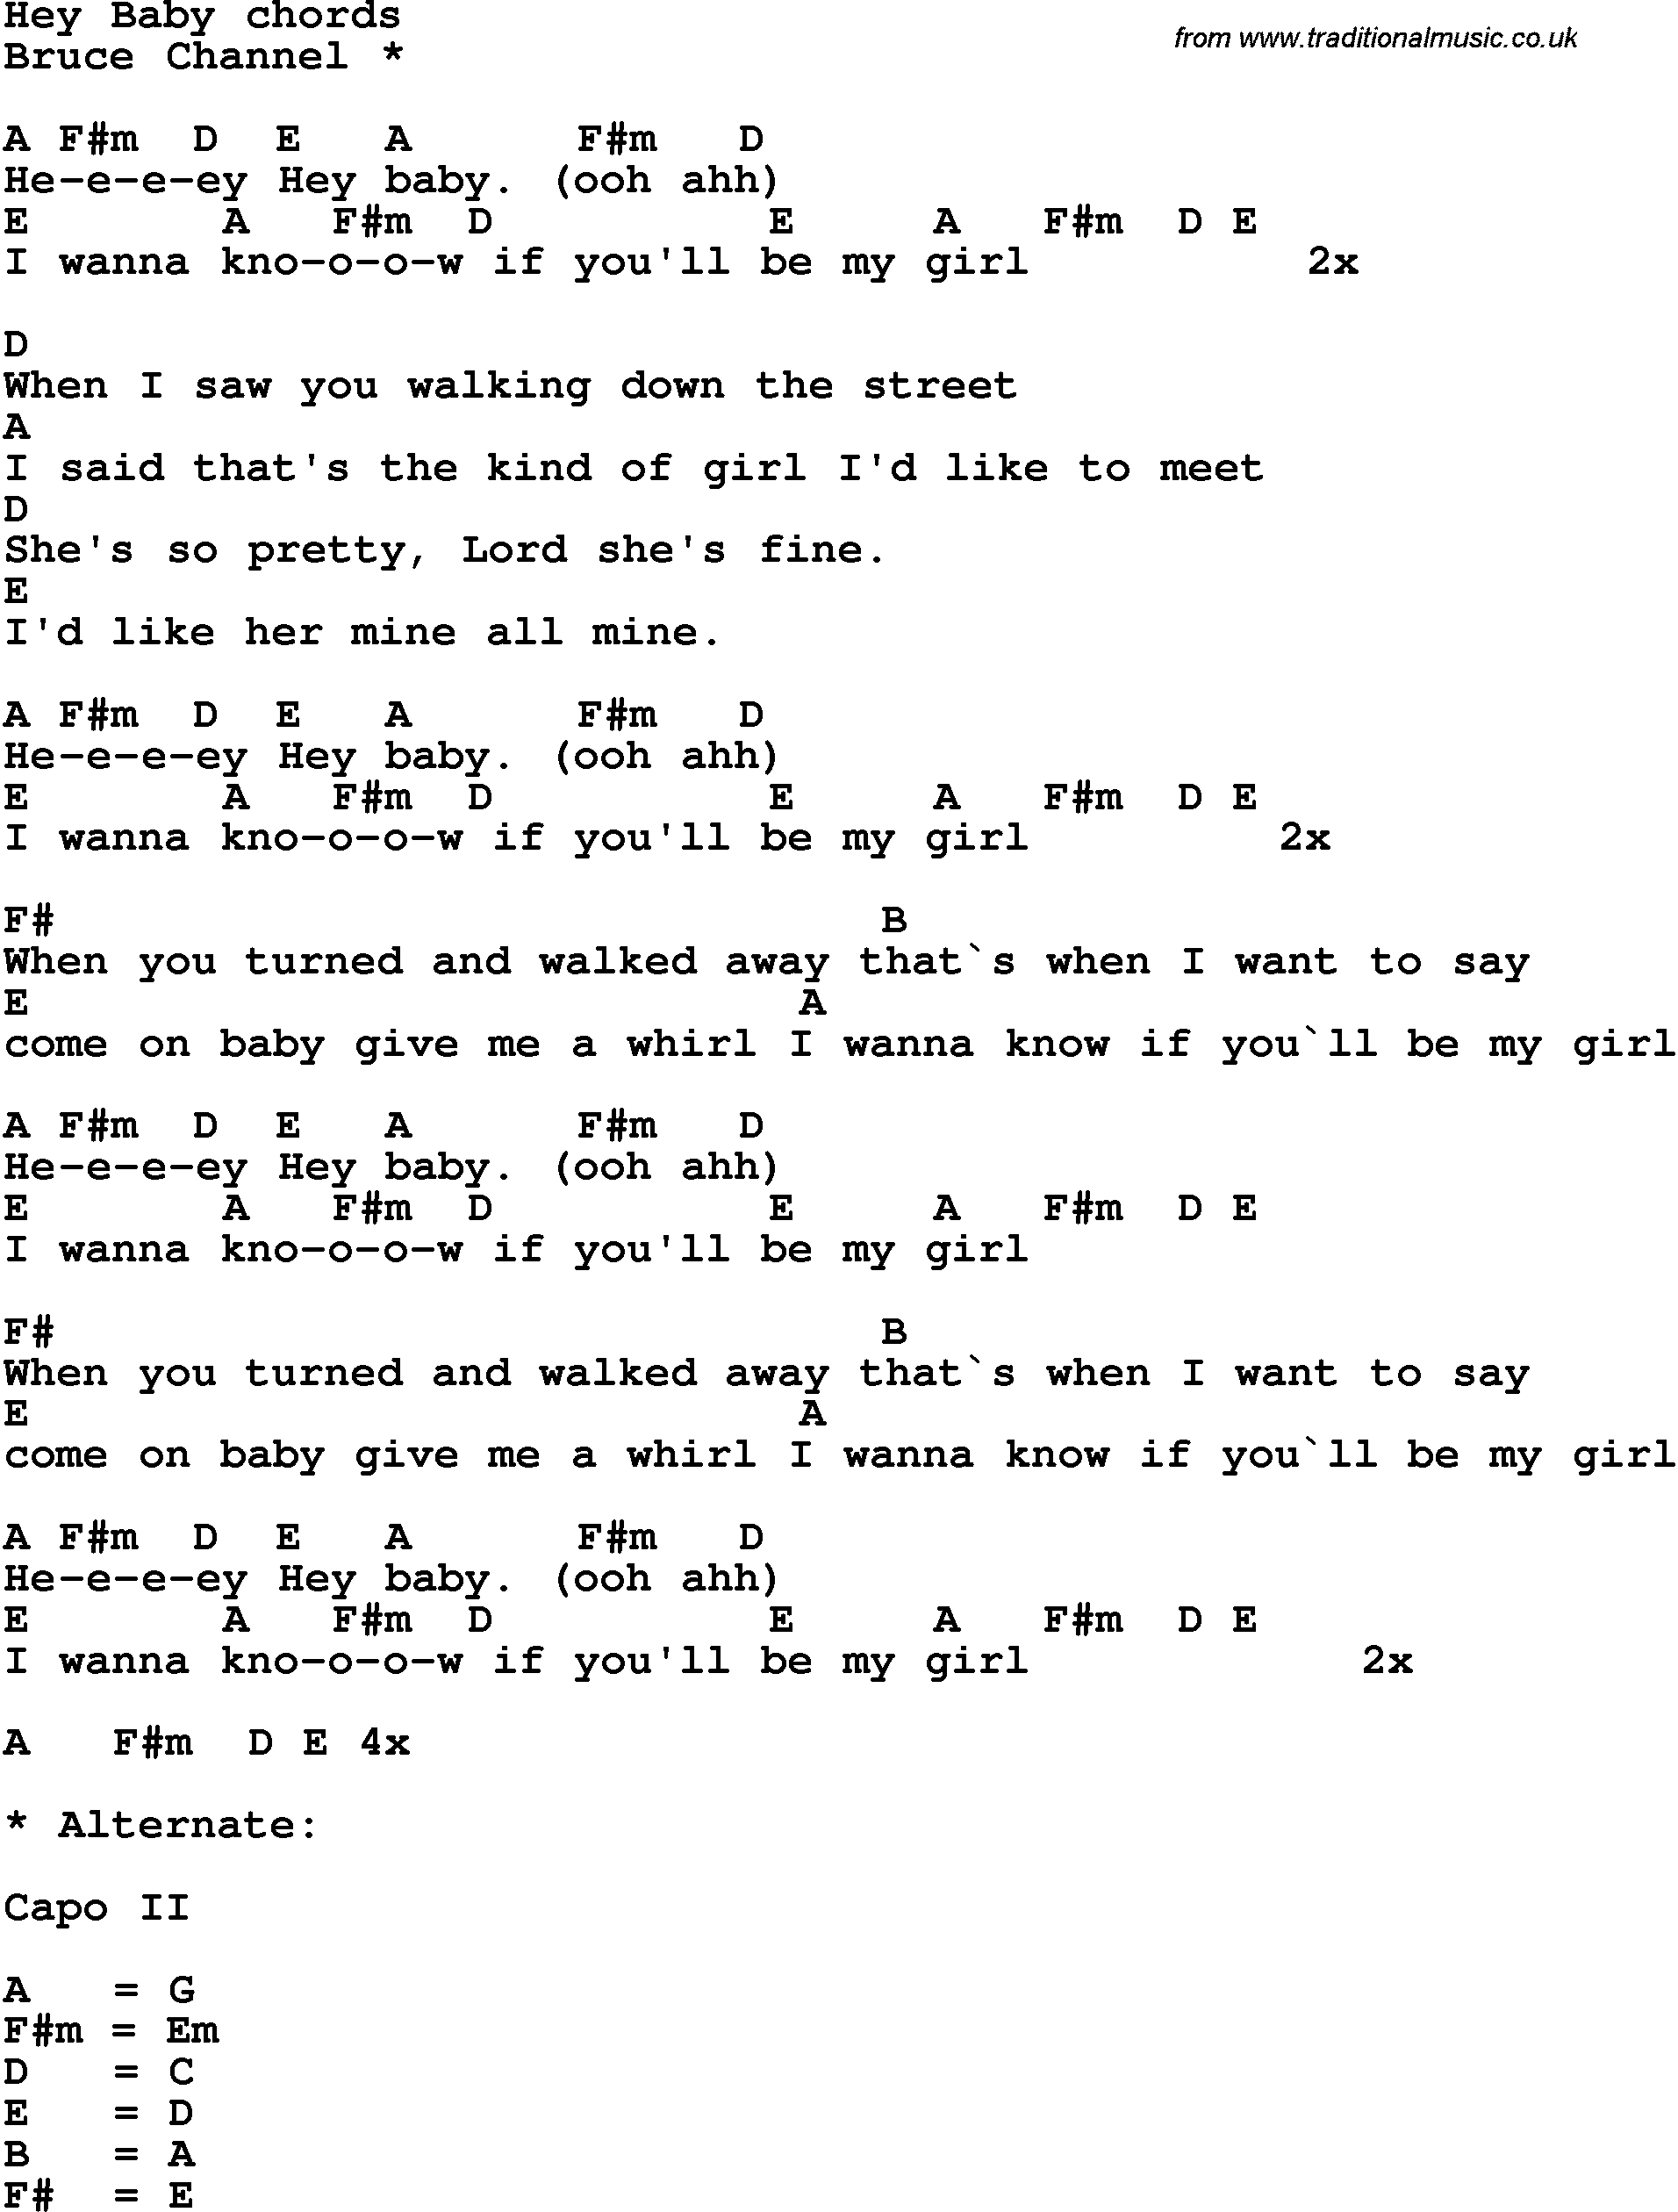 Song Lyrics with guitar chords for Hey Baby